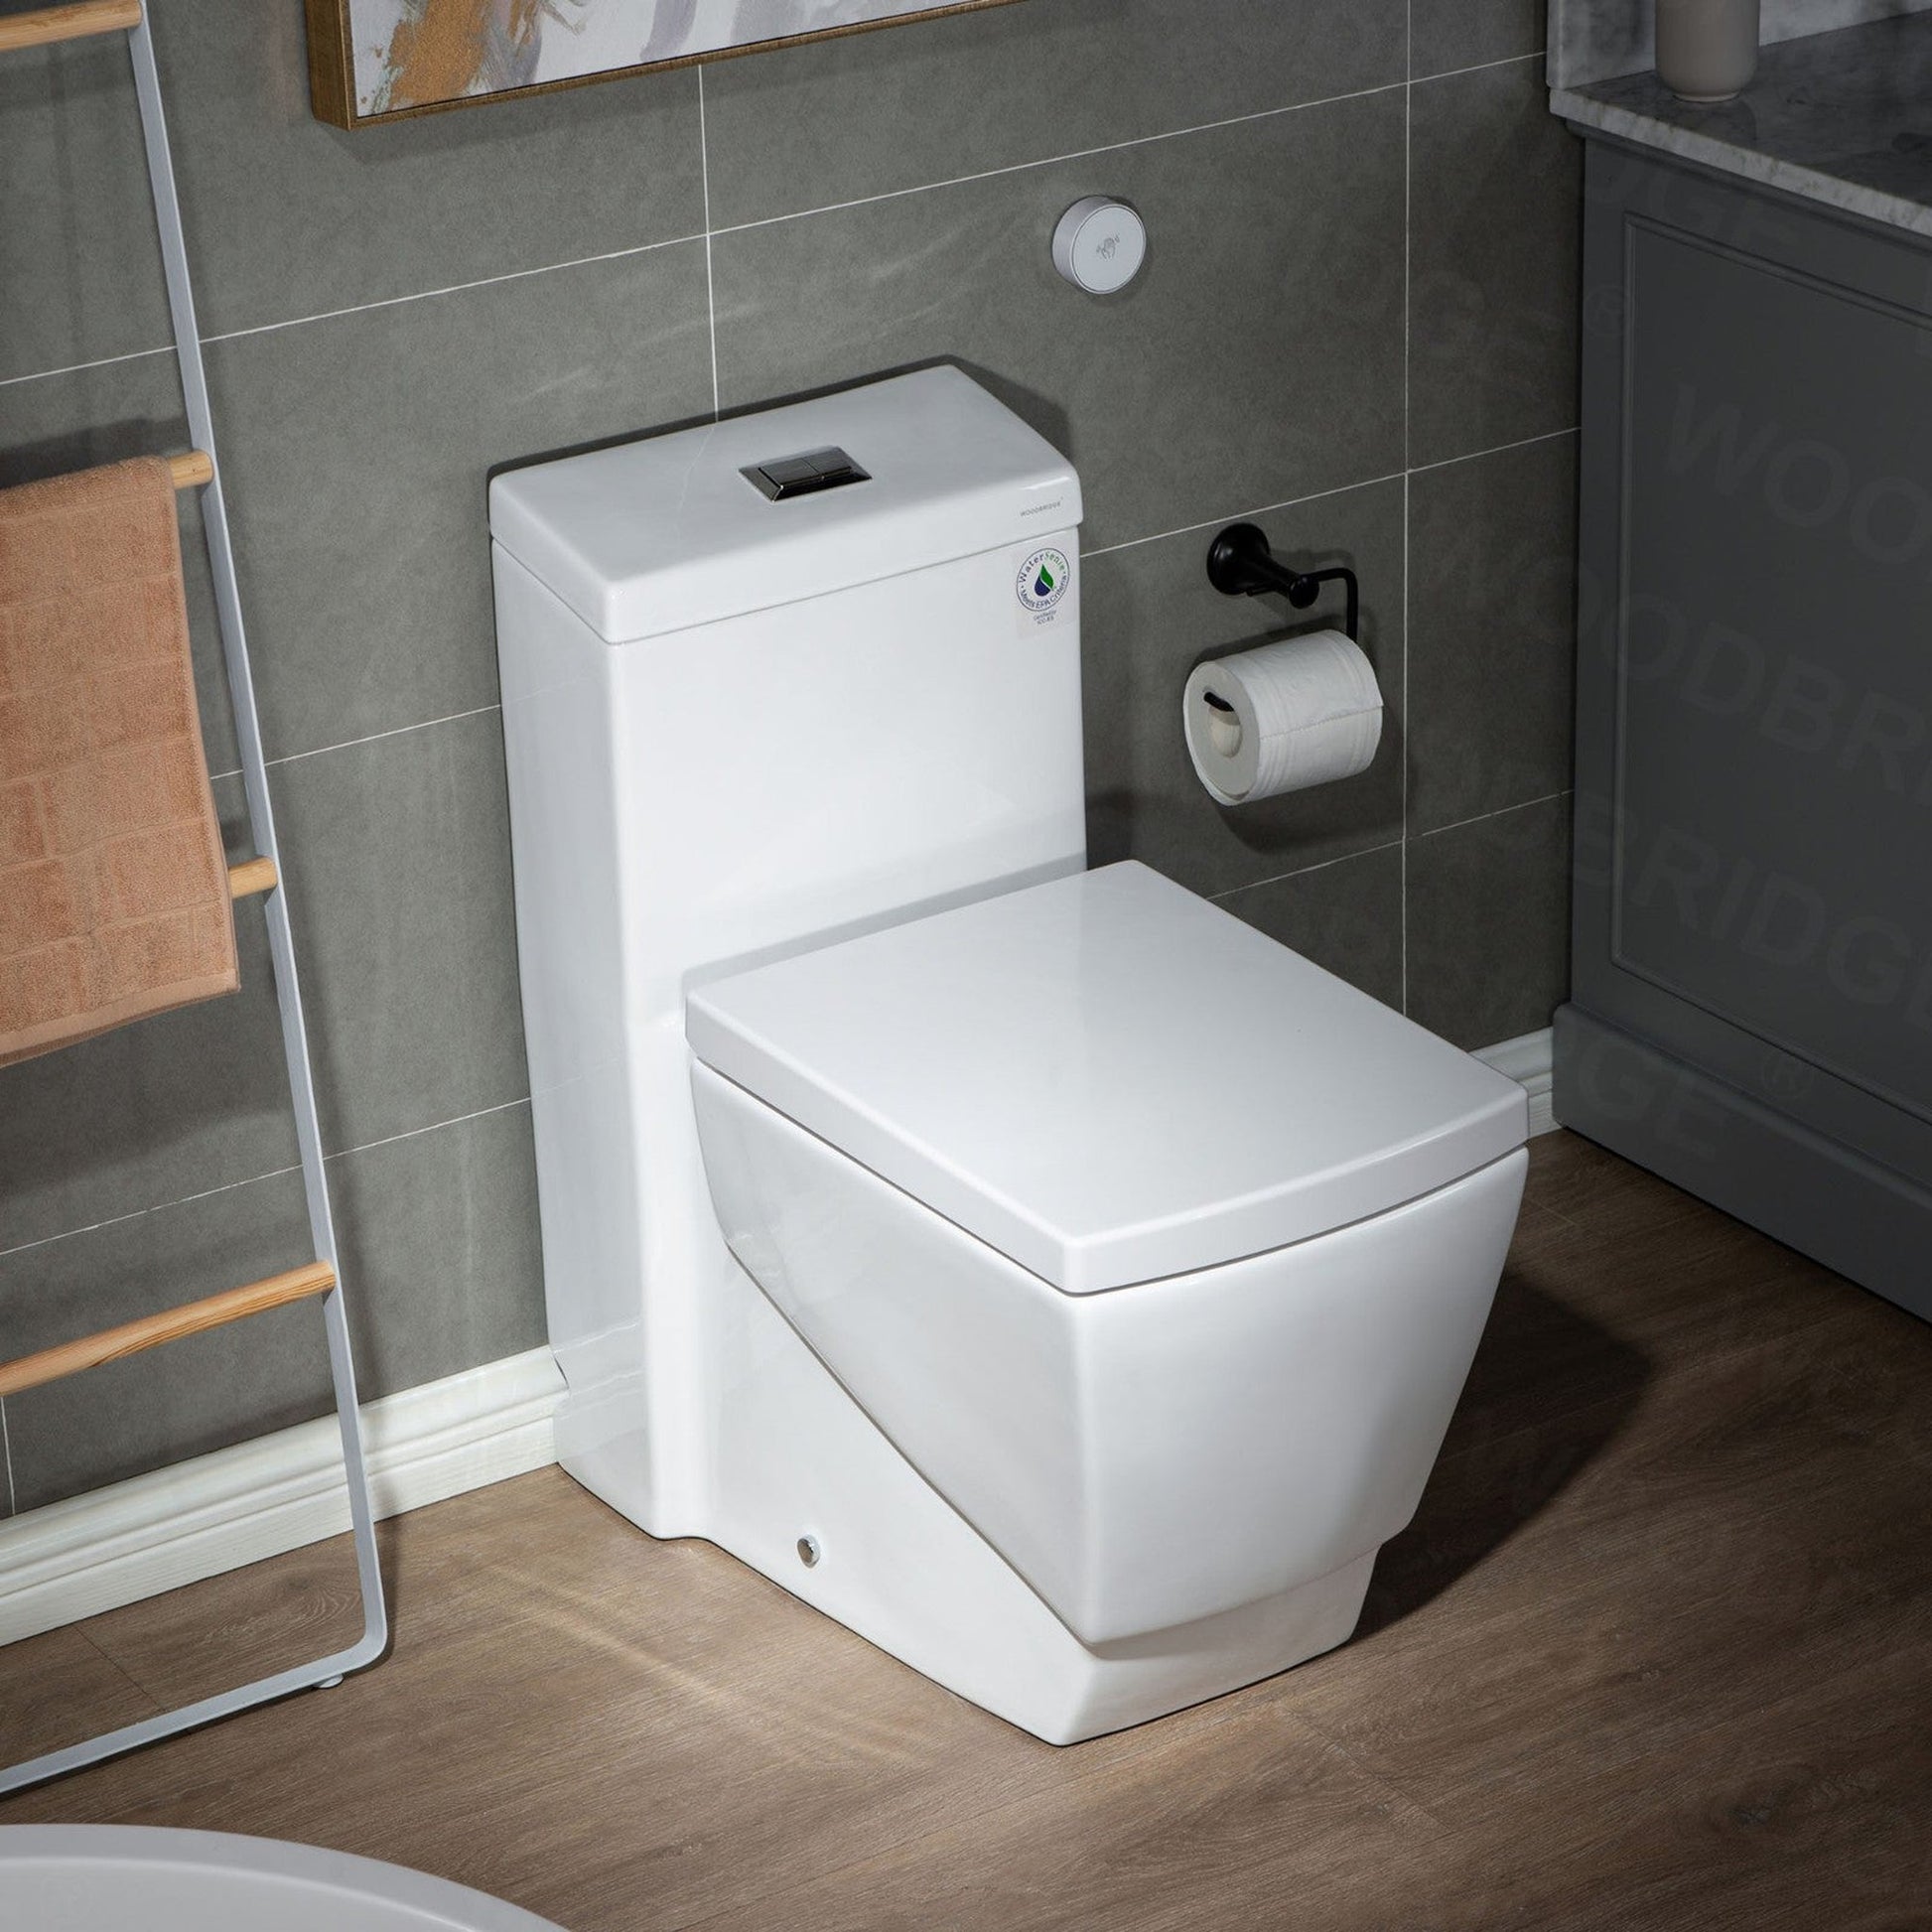 WoodBridge B-0920-A White Modern One-Piece Elongated Square Toilet With Solf Closed Seat and Hand Free Touchless Sensor Flush Kit